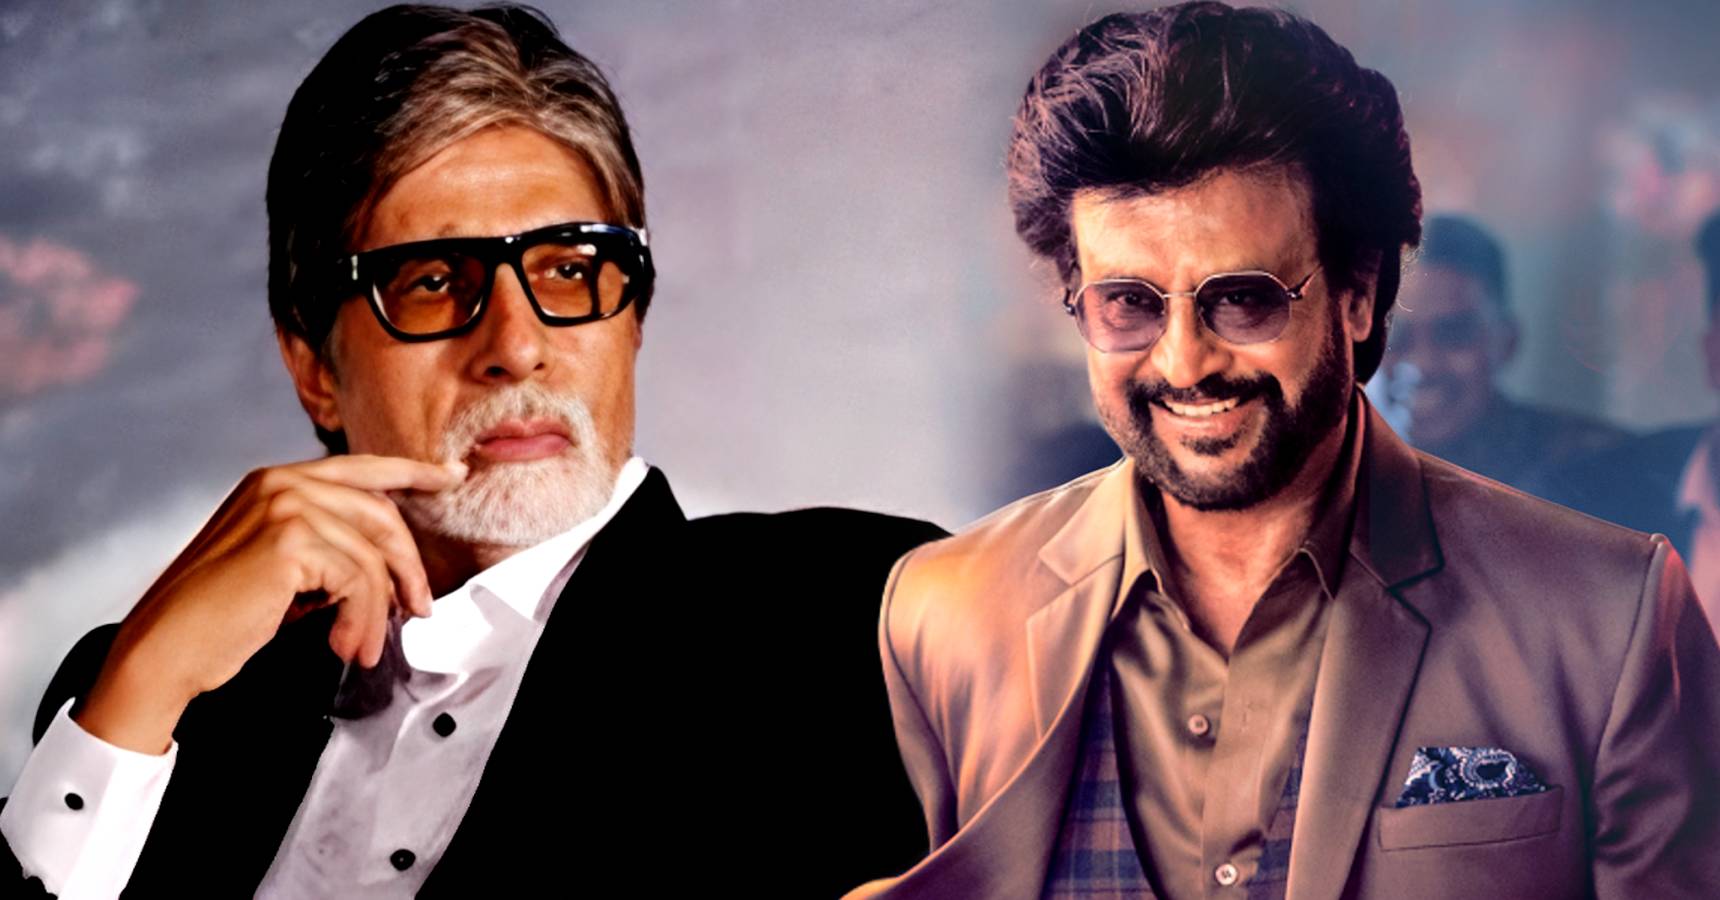 Bollywood actor Amitabh Bachchan iconic movies remake that made Rajinikanth a superstar